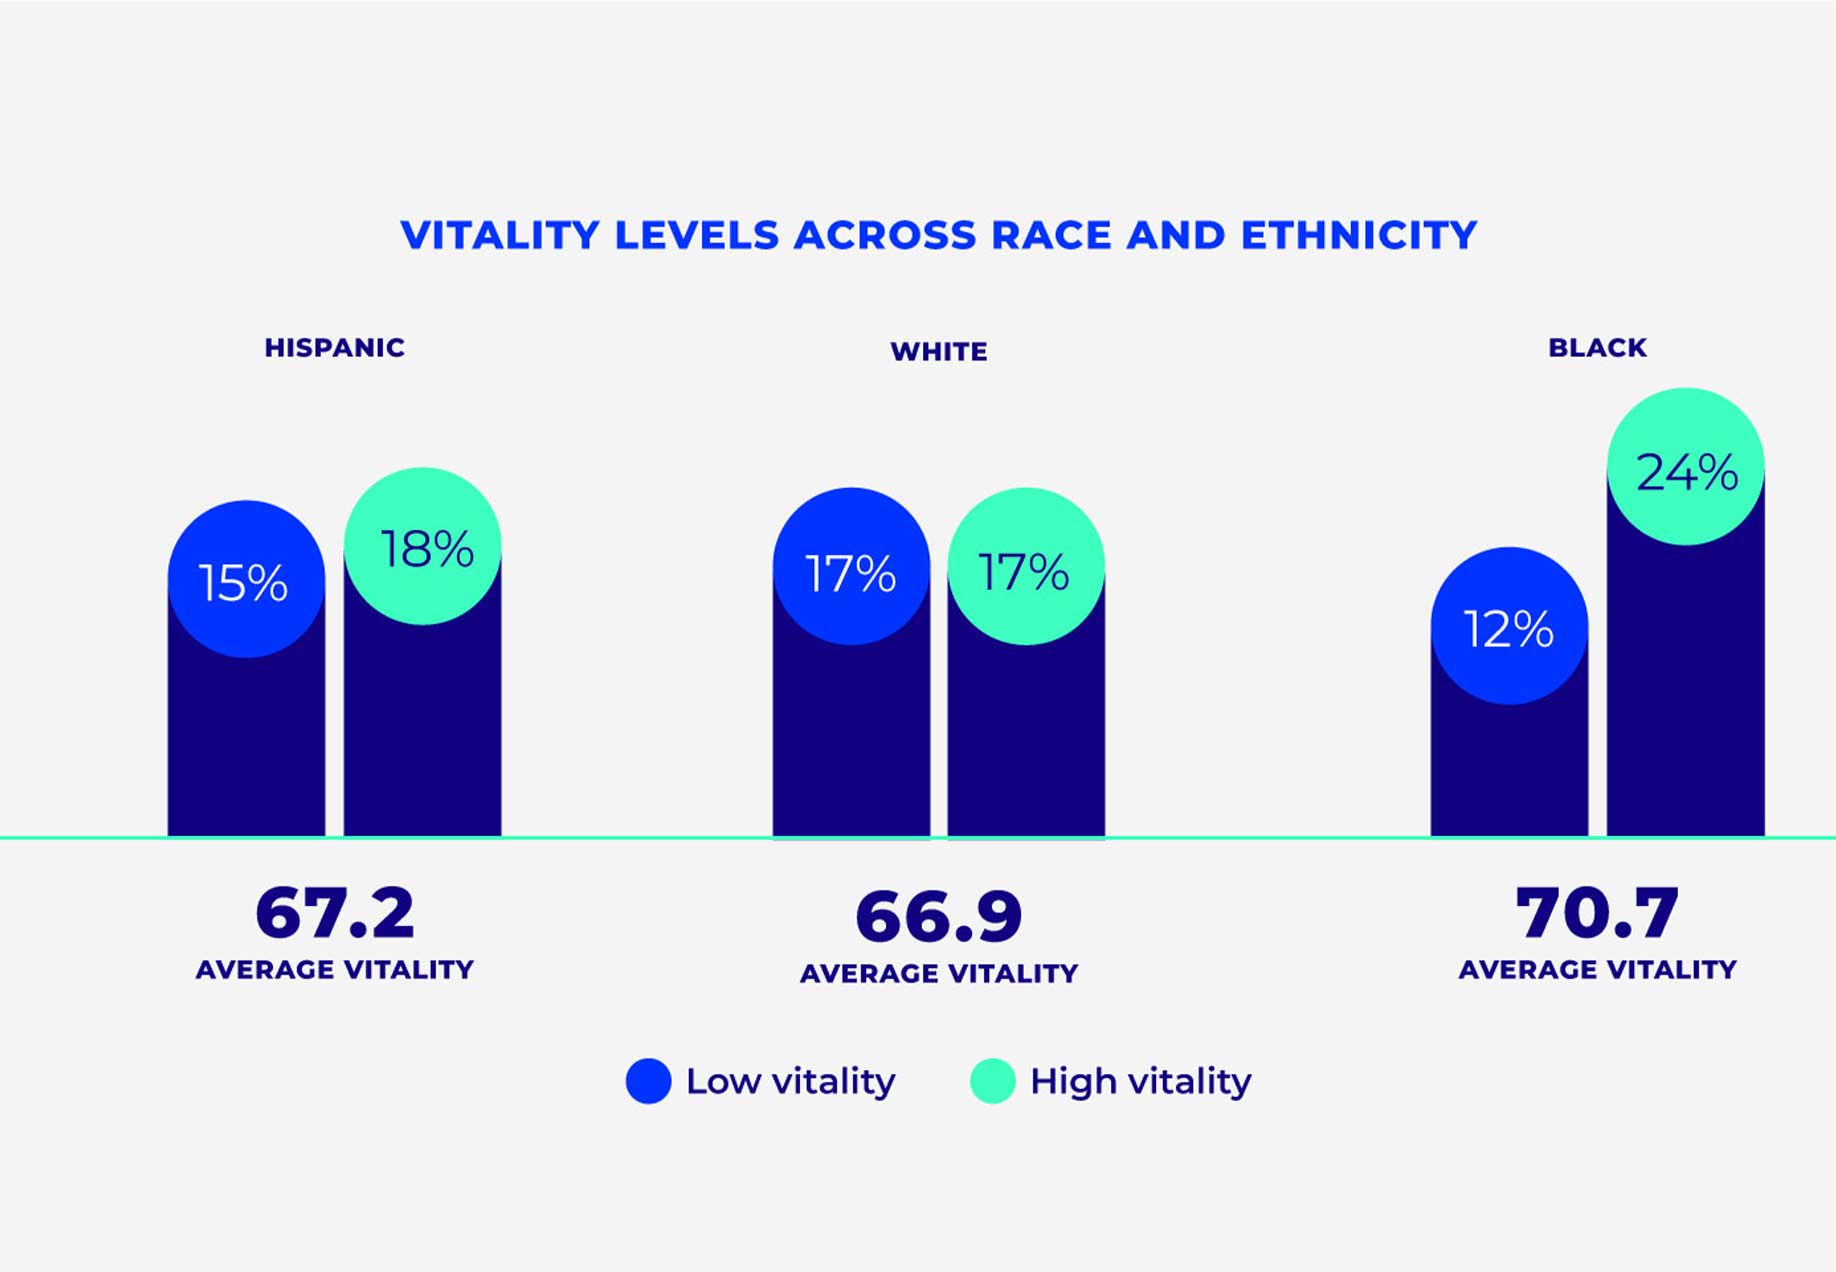 Black respondents had the highest vitality score than any other race/ethnicity, and their high vitality rate is 7 points higher than their white counterparts (24% vs. 17%).